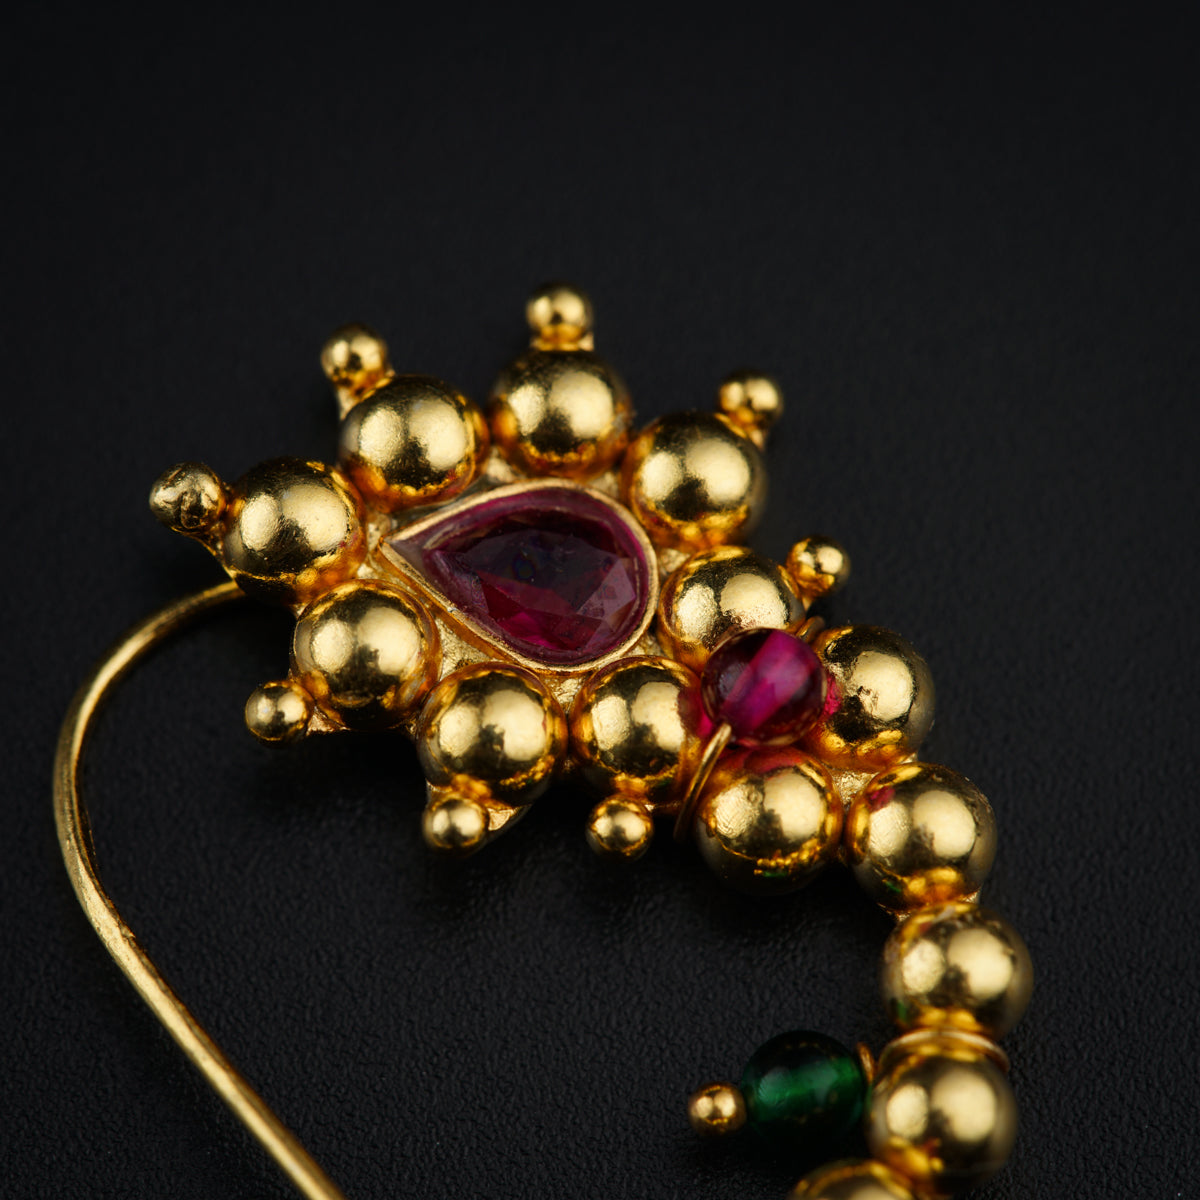 a close up of a gold brooch with a red stone